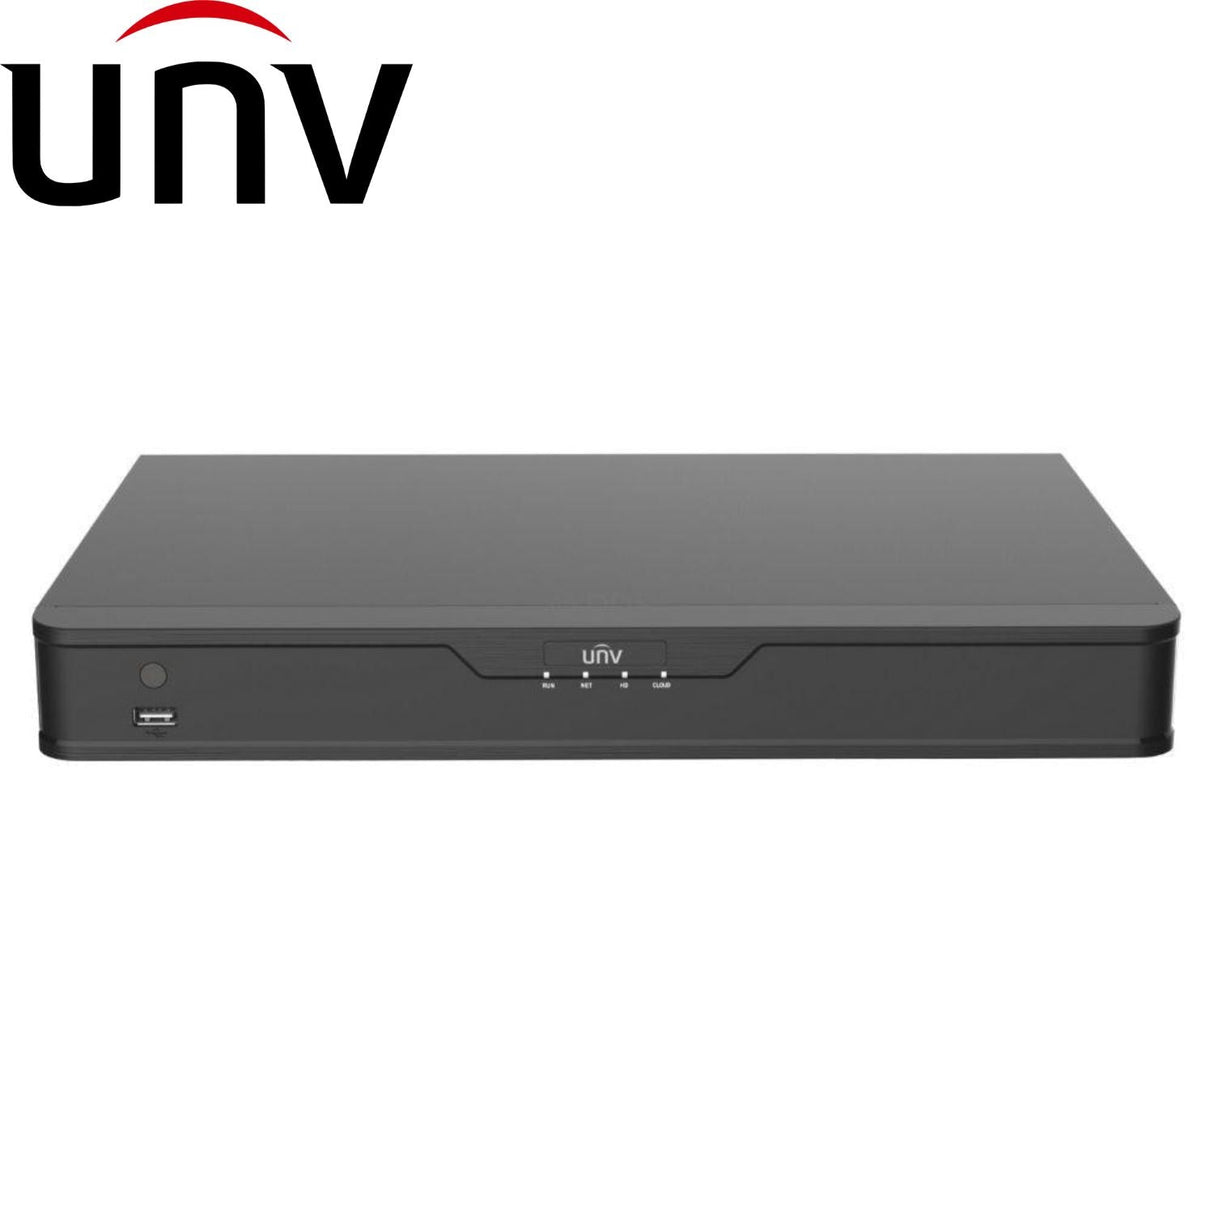 Uniview LightHunter Security System: 6x 6MP Turret Cams, 8CH 4K NVR + HDD